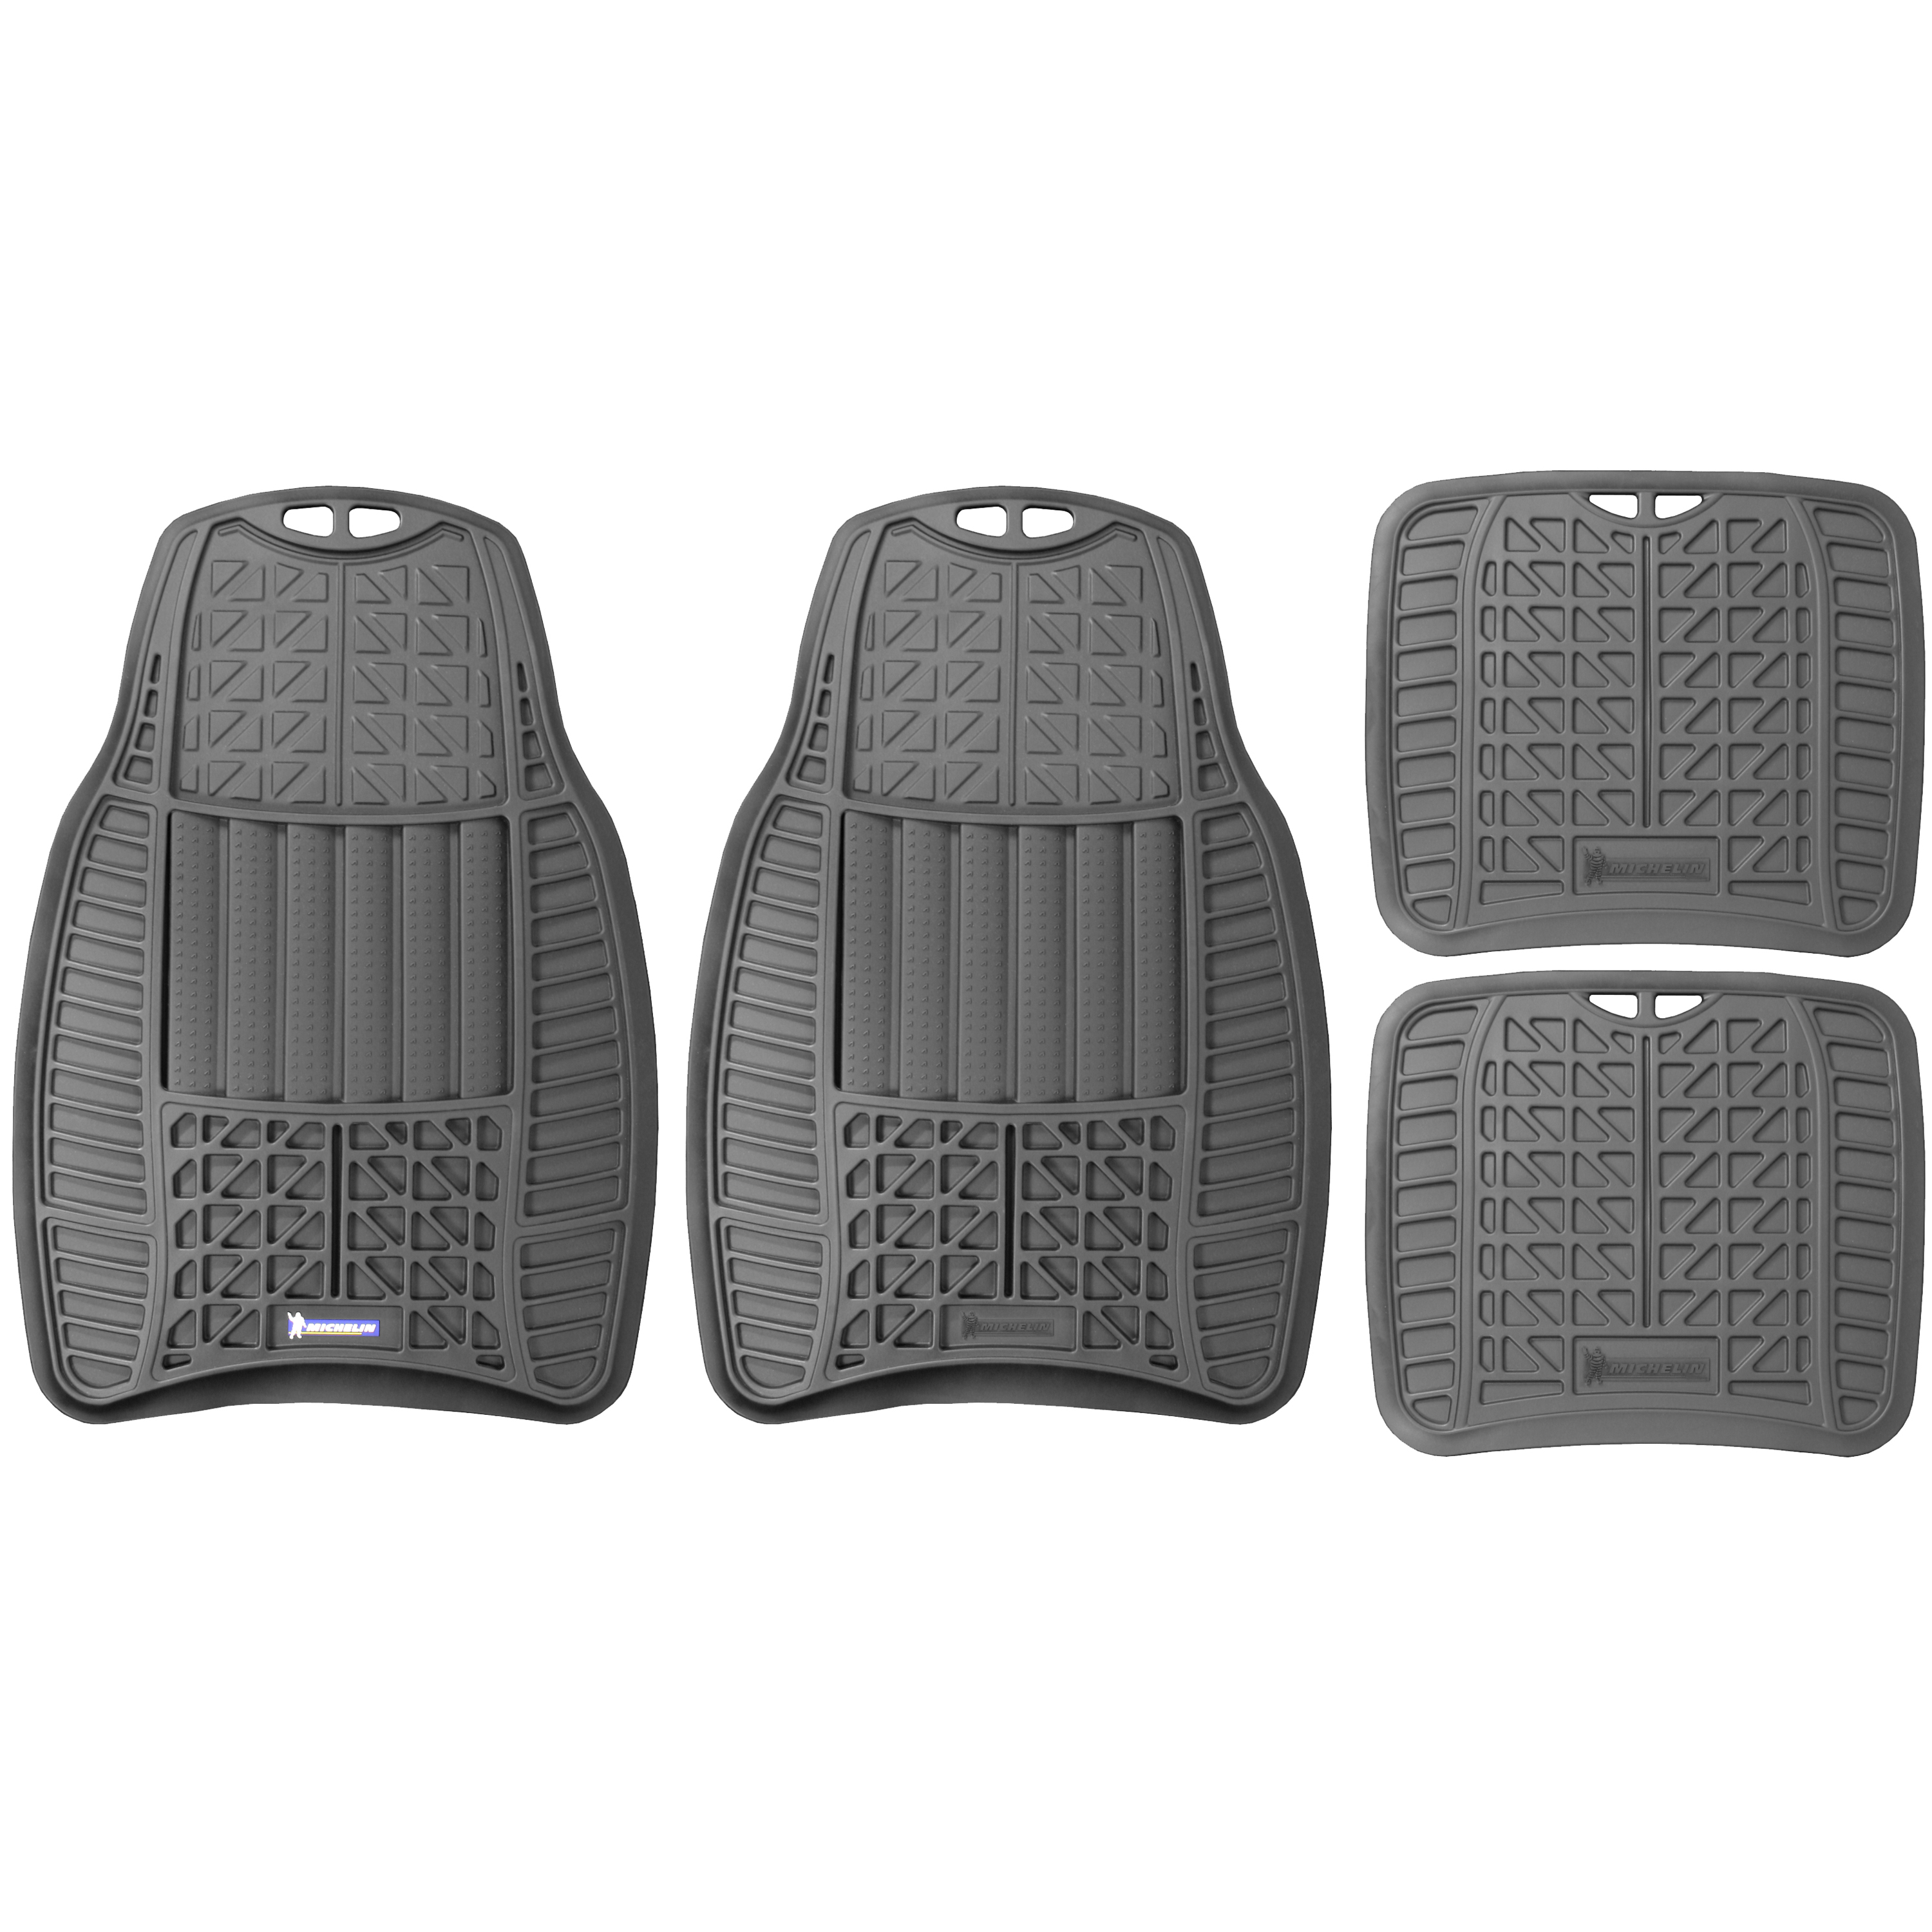 Michelin 4-Piece All-Weather Floor Mat Set, Gray - image 1 of 1